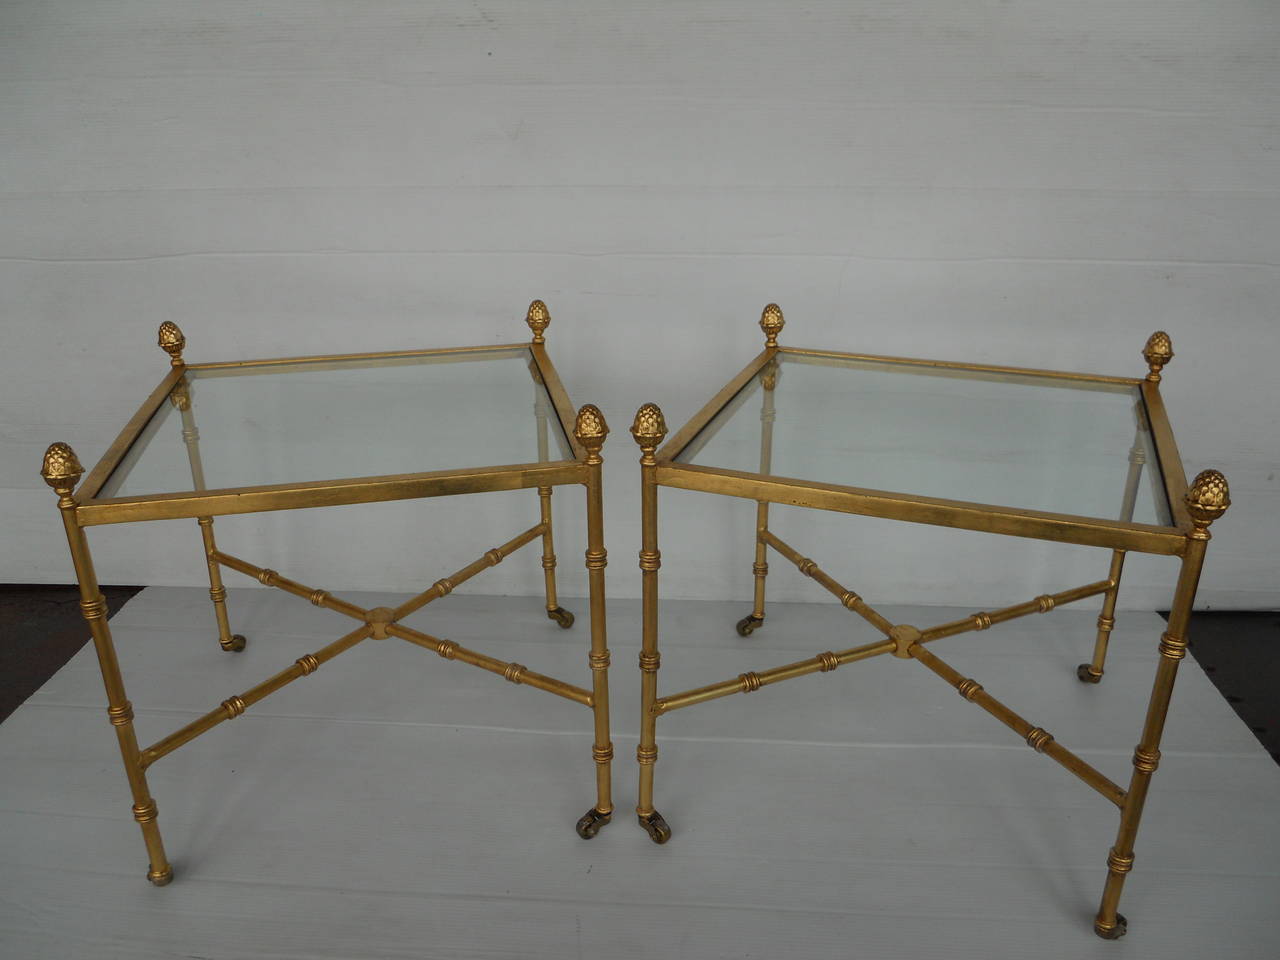 Pair of American vintage side tables.
Metal with gold leaf.
Made in modern interpretation of Empire style.
Actual height of the table where the glass top ends is 18